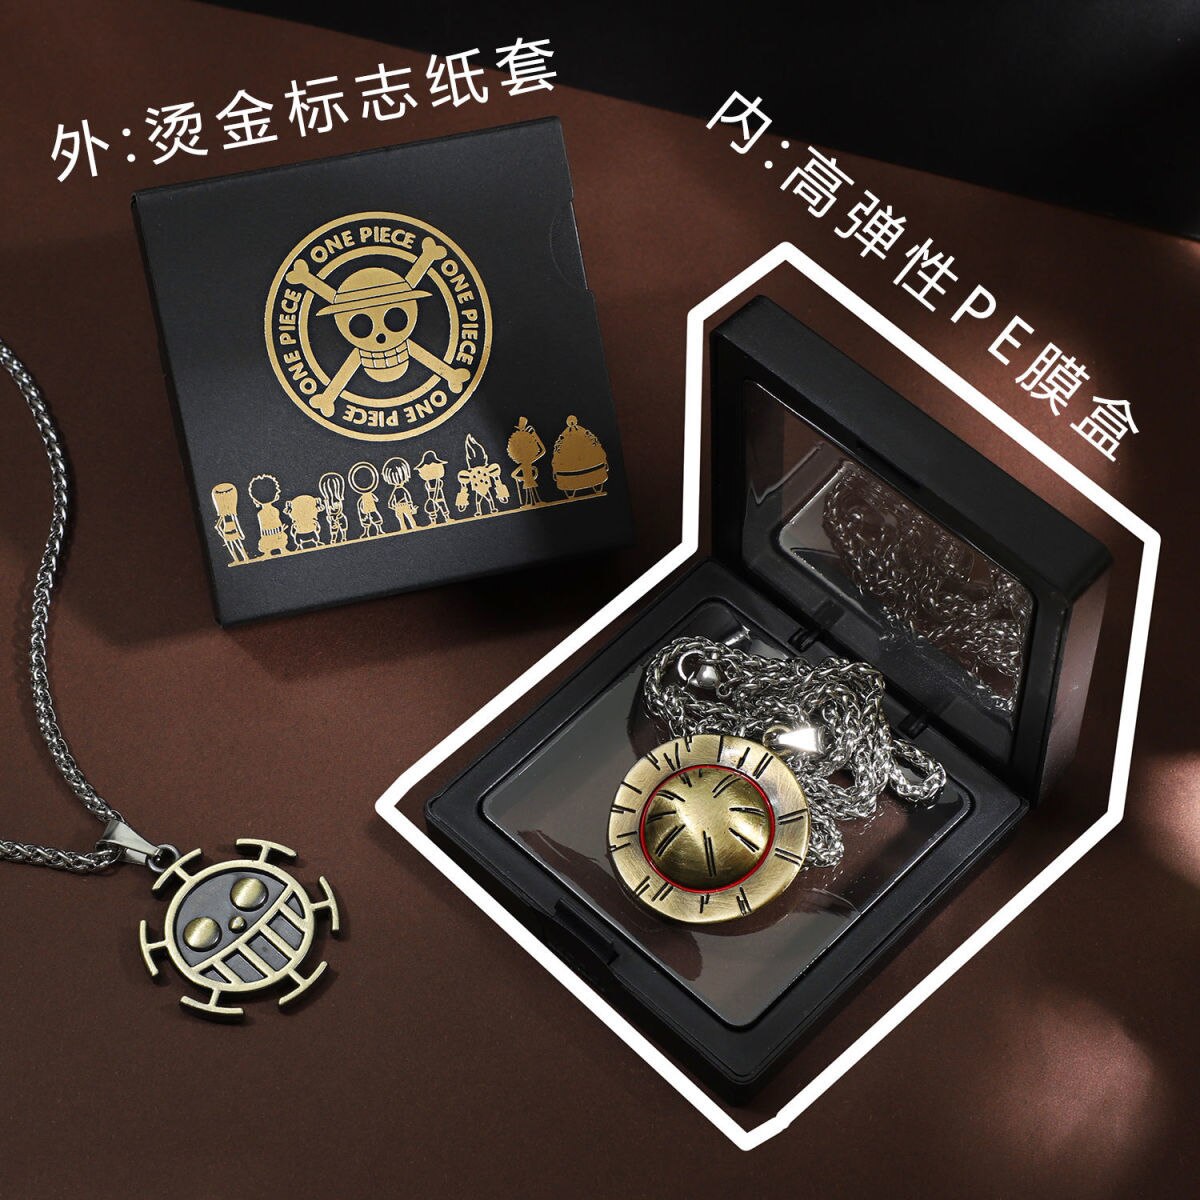 New anime One Piece Luffy necklace men and women straw hat Ace around metal pendant Luo 1 - One Piece Store